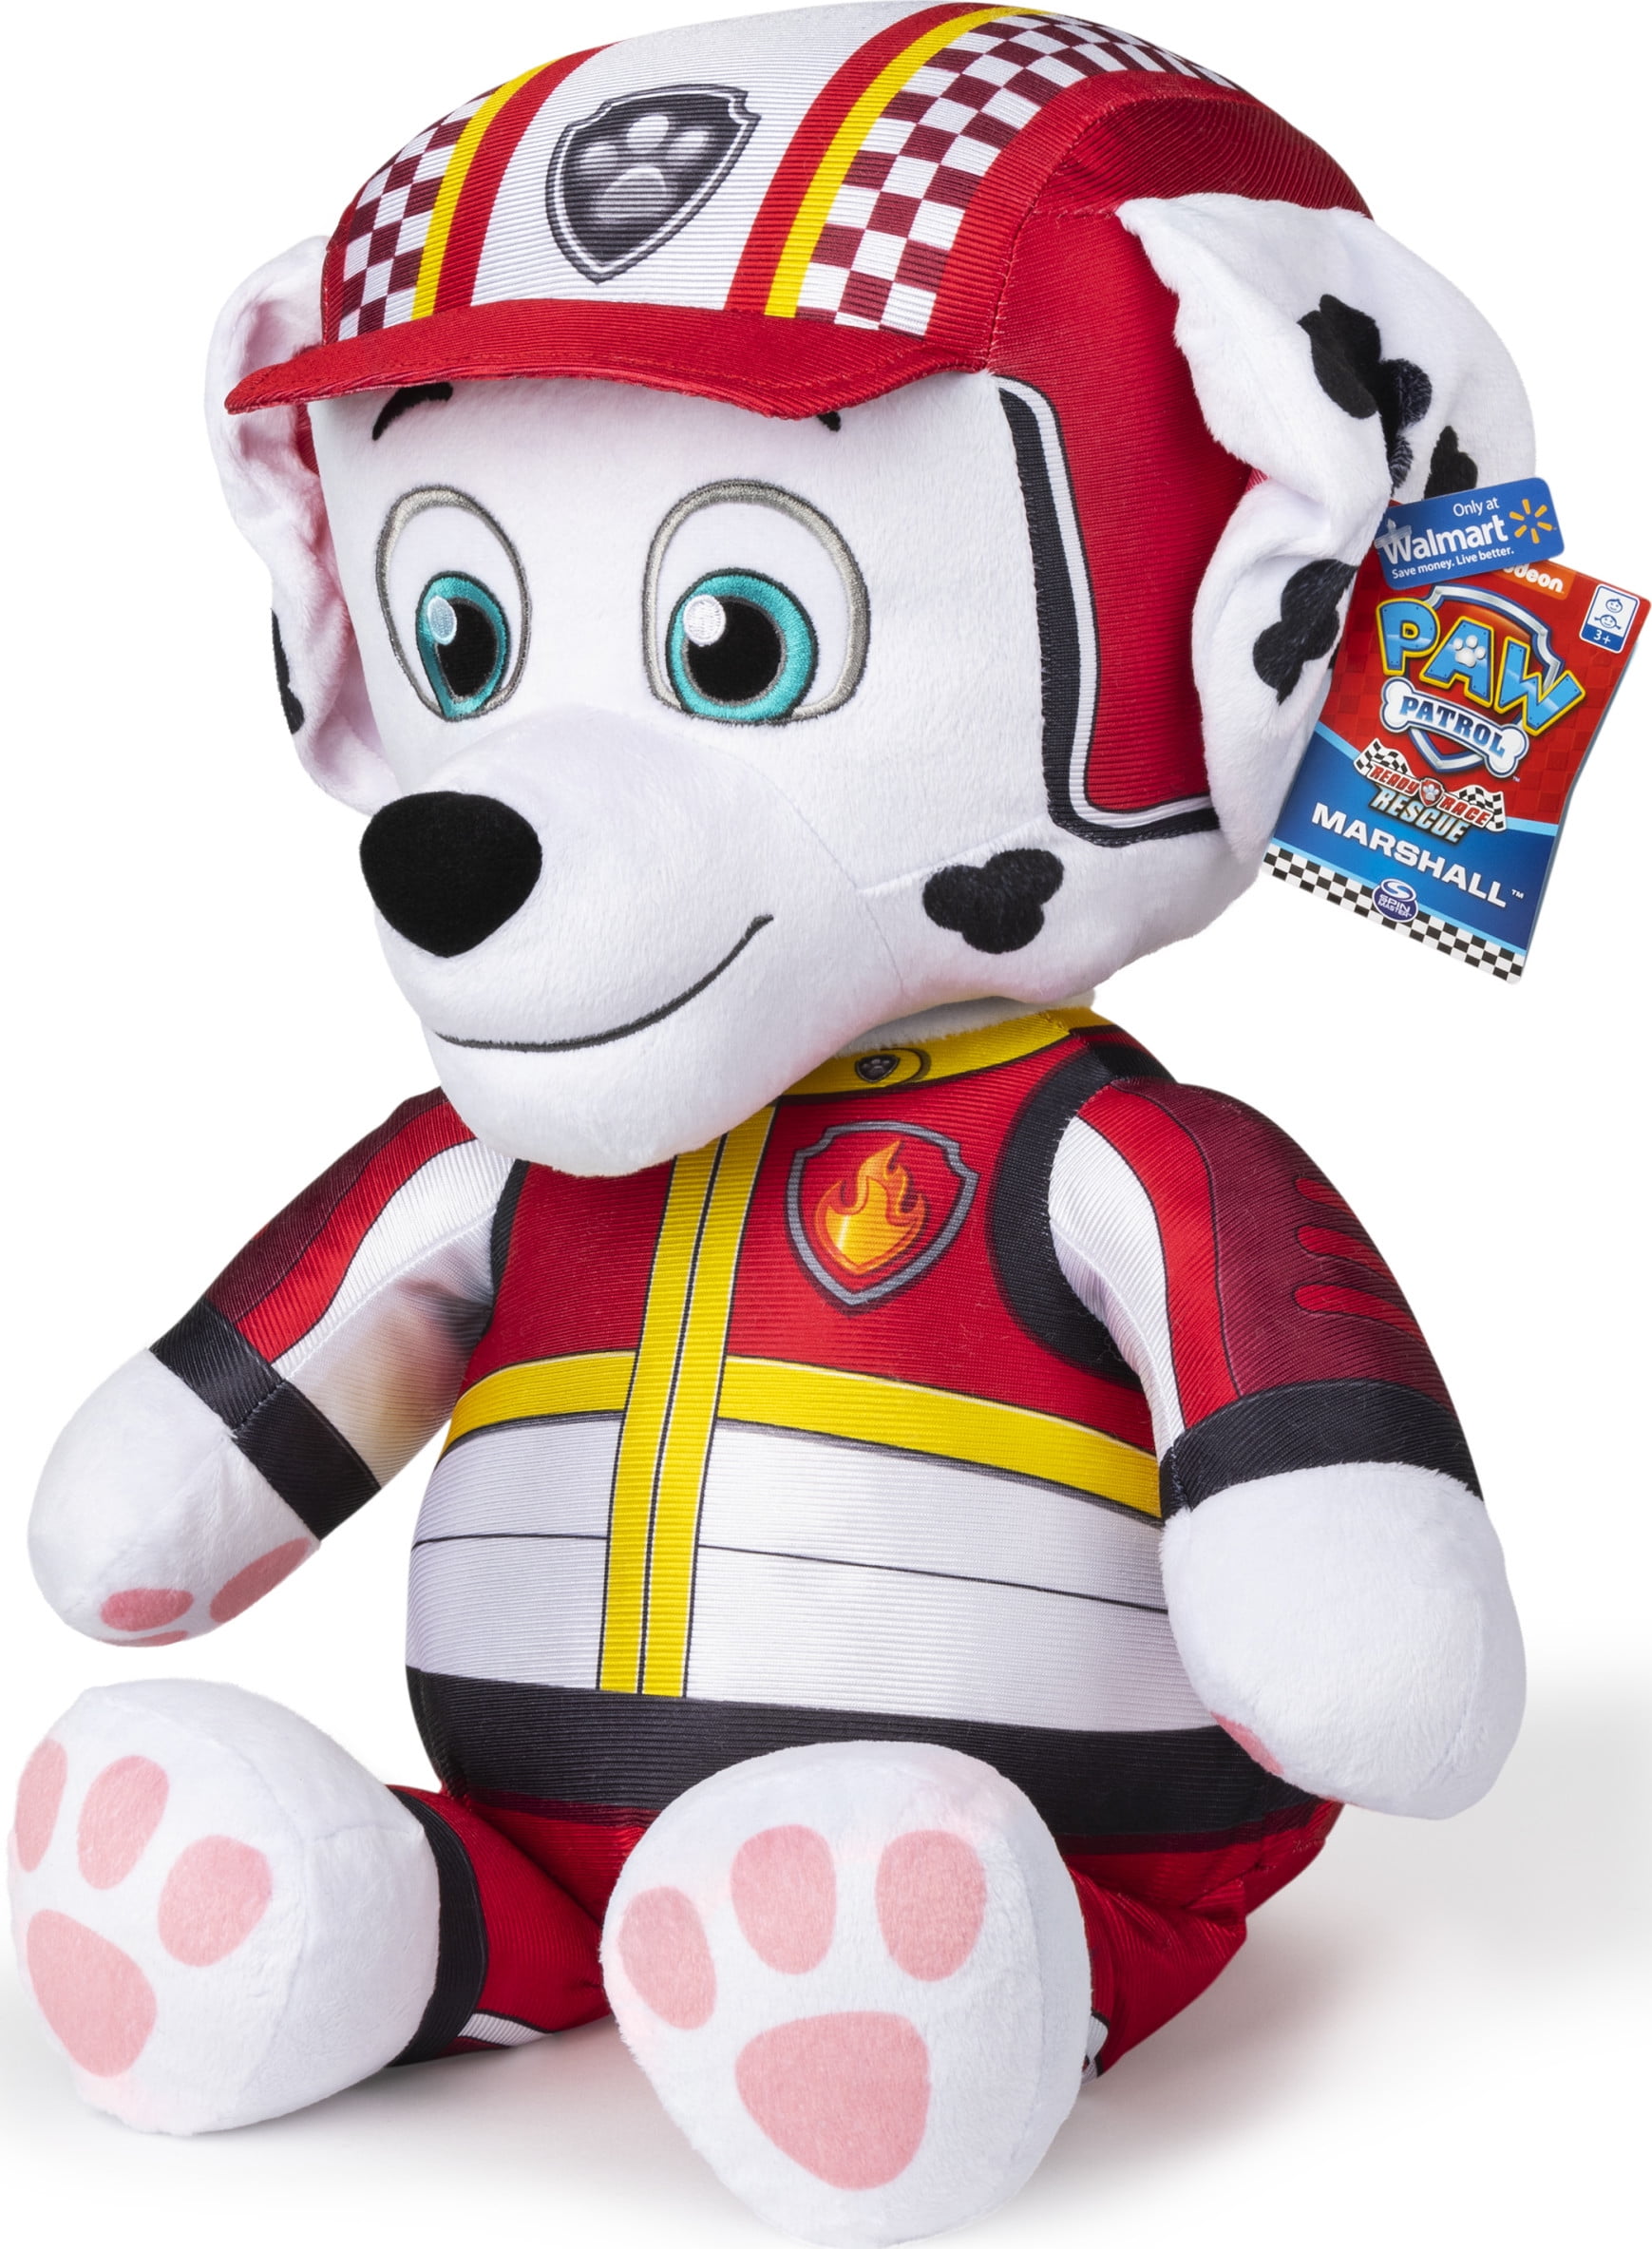 PAW Patrol, 24-Inch Ready, Race, Rescue Marshall Jumbo Plush, Walmart Exclusive, for Ages 3 and Up Walmart.com